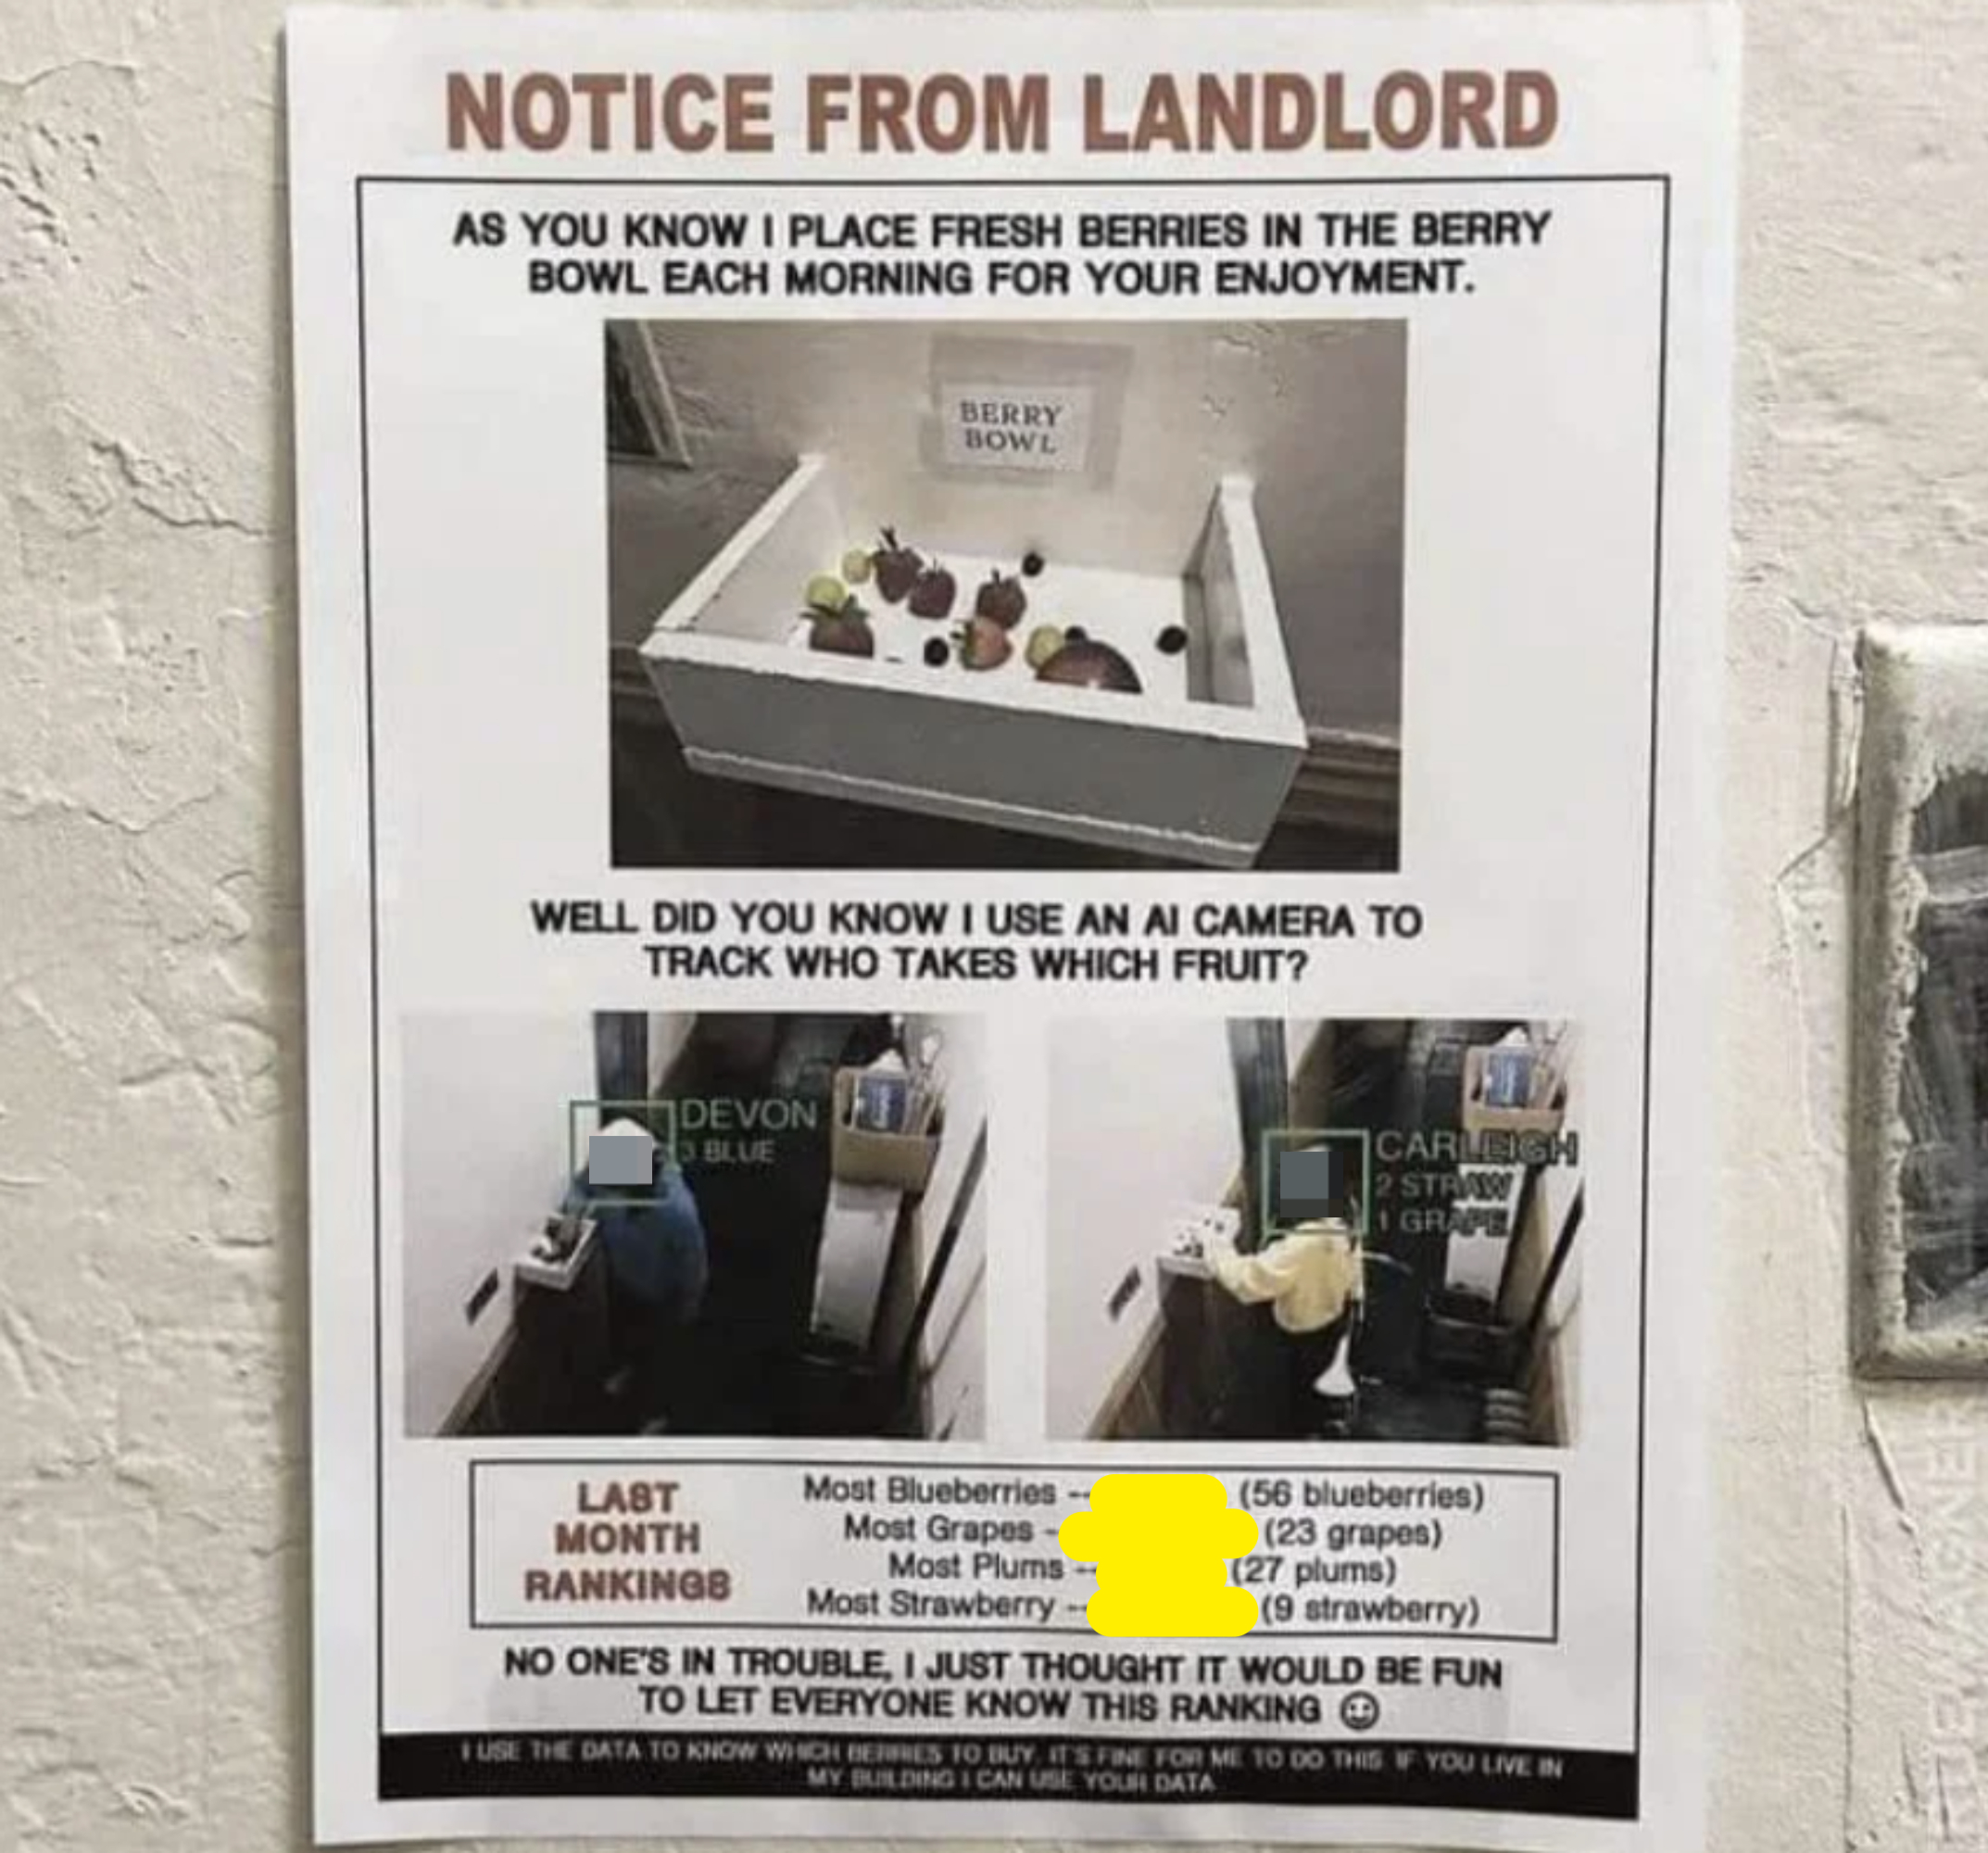 The image is a humorous printed notice from a landlord about tracking which tenant eats more berries using an AI camera, with individual berry counts